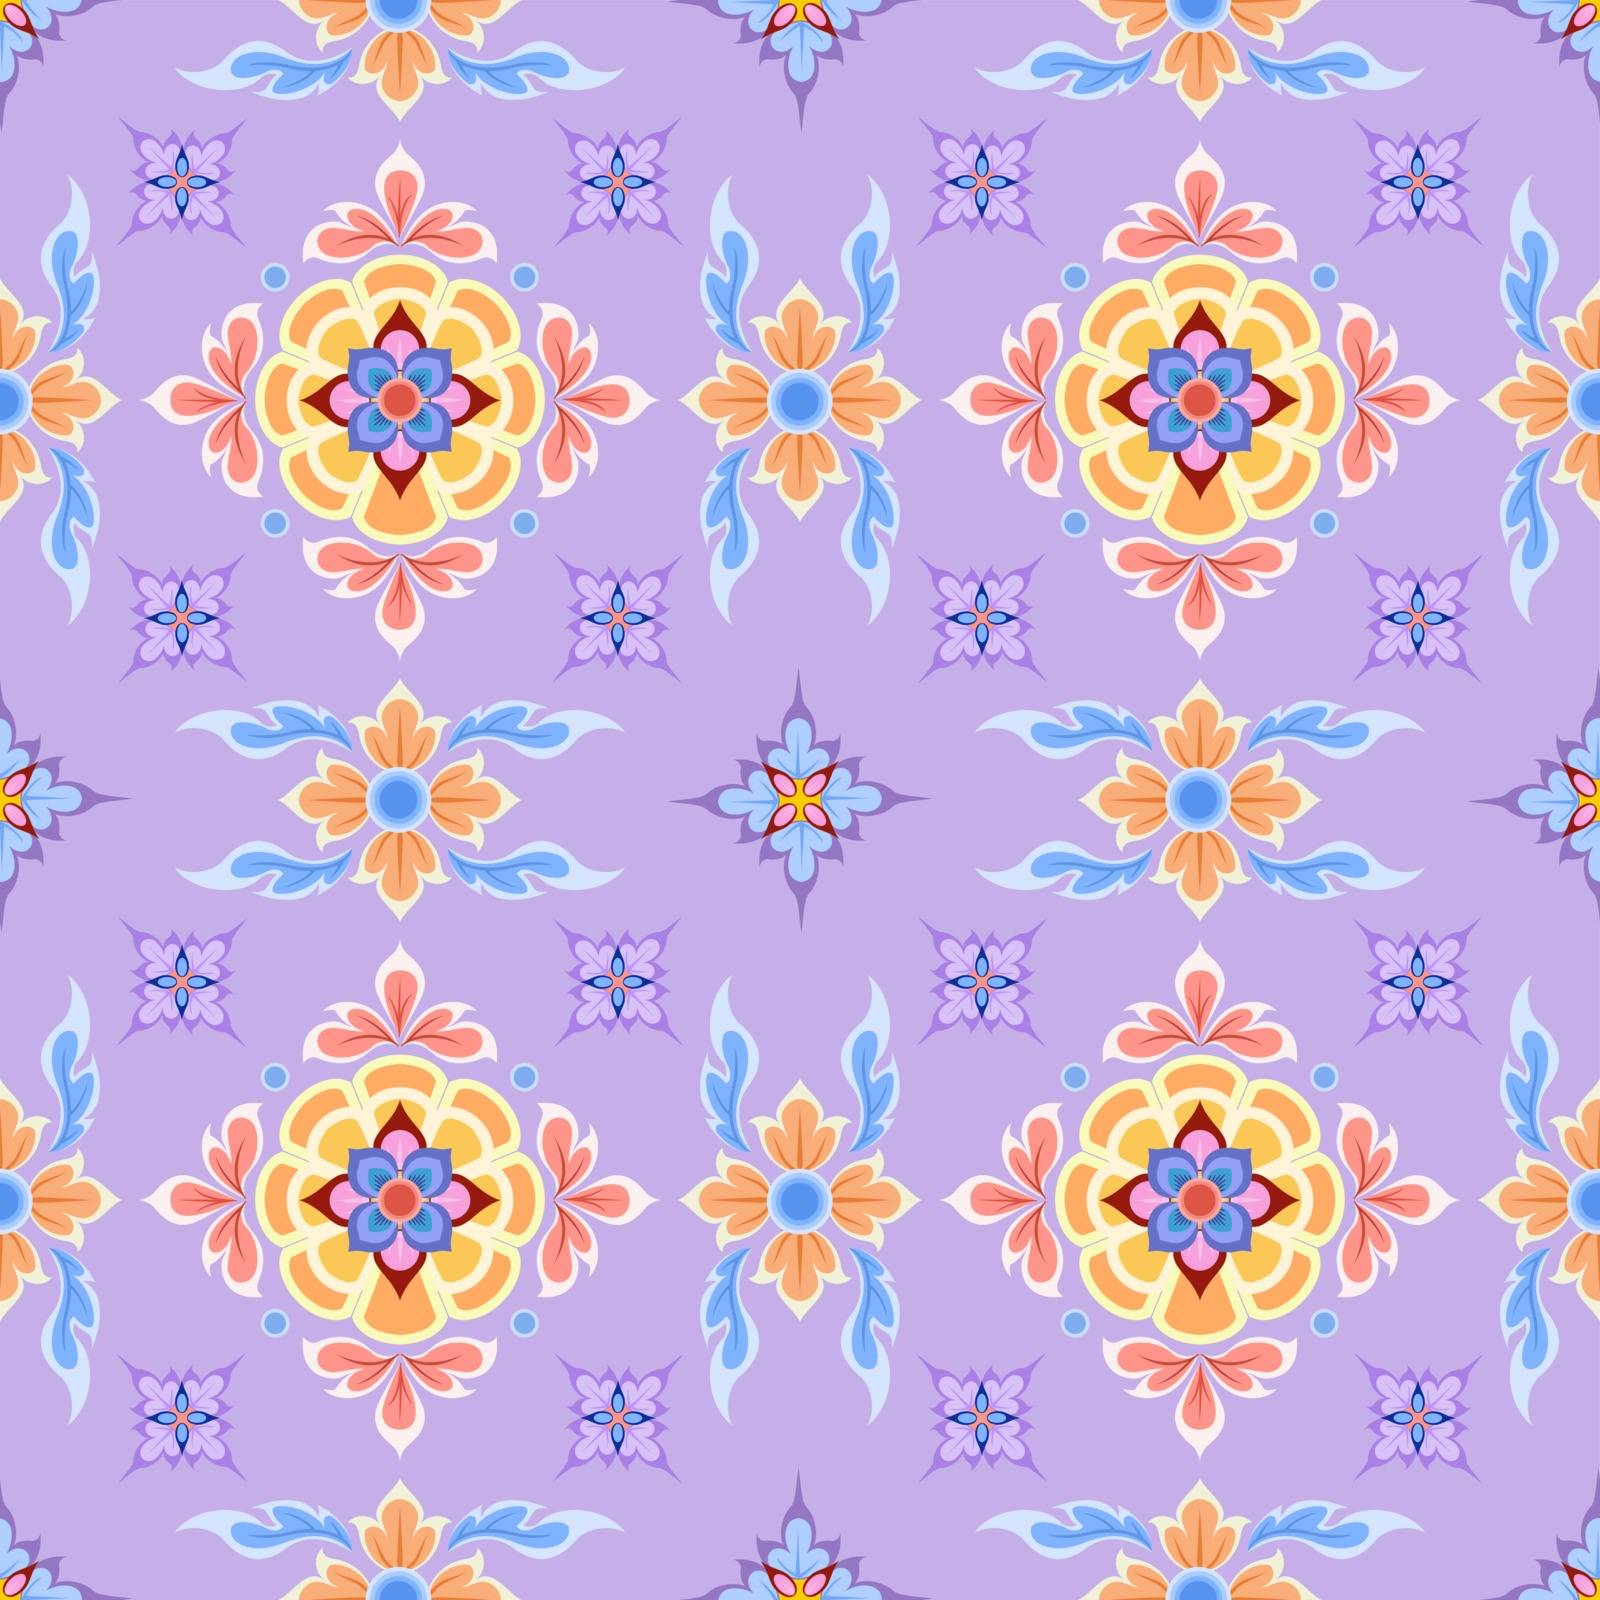 Thai traditional art on violet color background pattern.